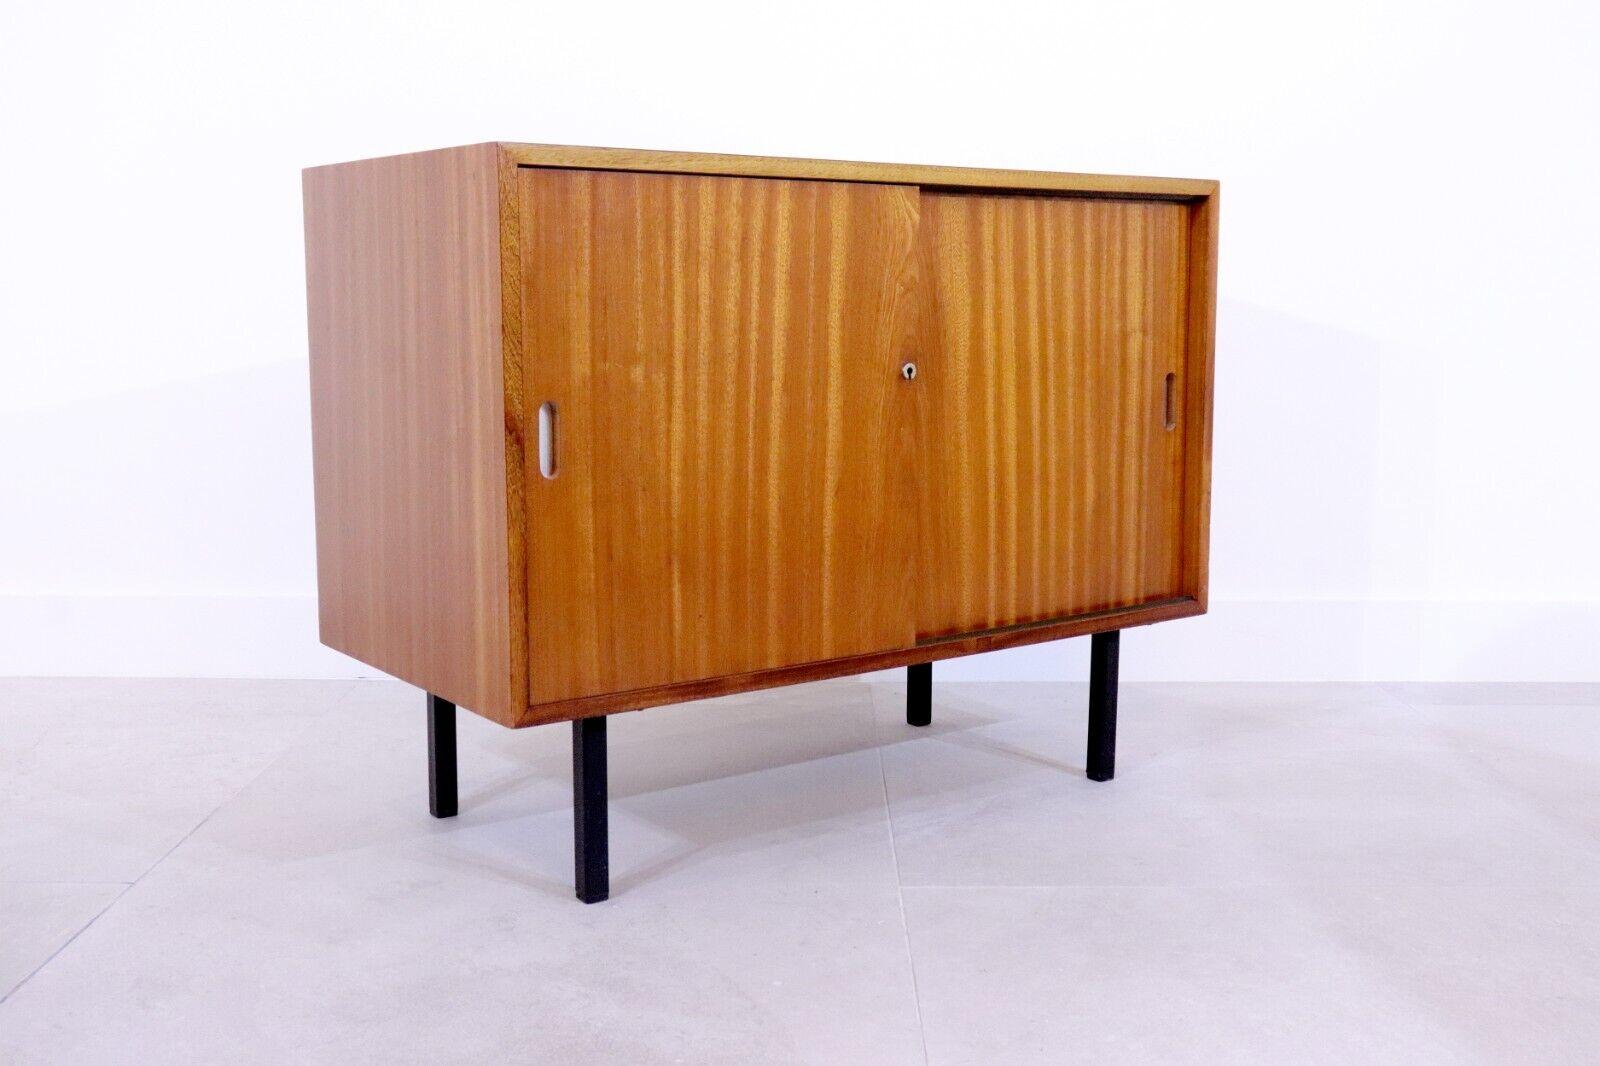 Teakwood cupboard, Robin Day, 1950s; with 4 drawers on the left side, ideal for file storage, and a large open cabinet on the right. Sliding doors allow for easy accessibility. This cabinet would be ideal for an office, but has uses in many other